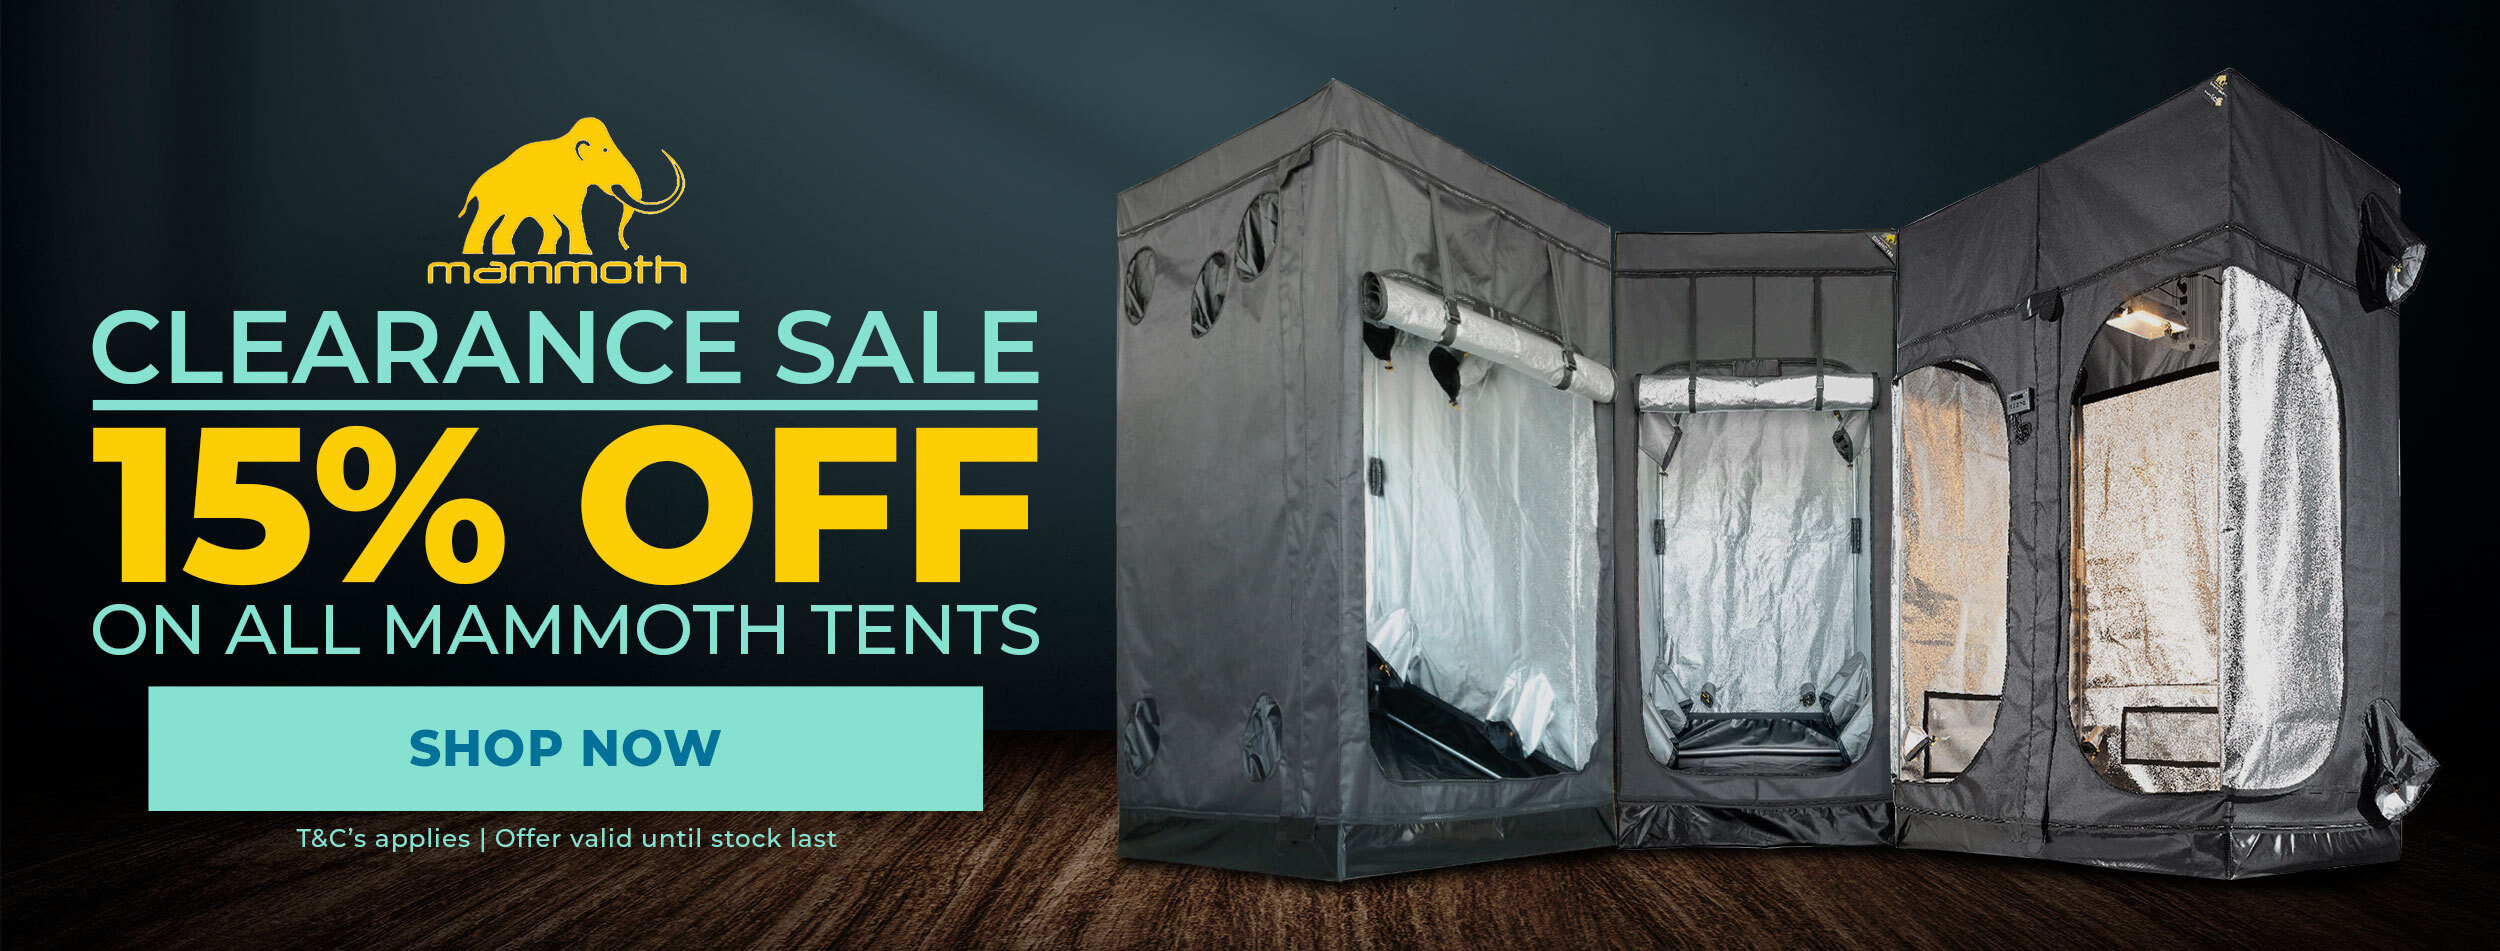 Mammoth Grow Tent Clearance Sale - 15% OFF